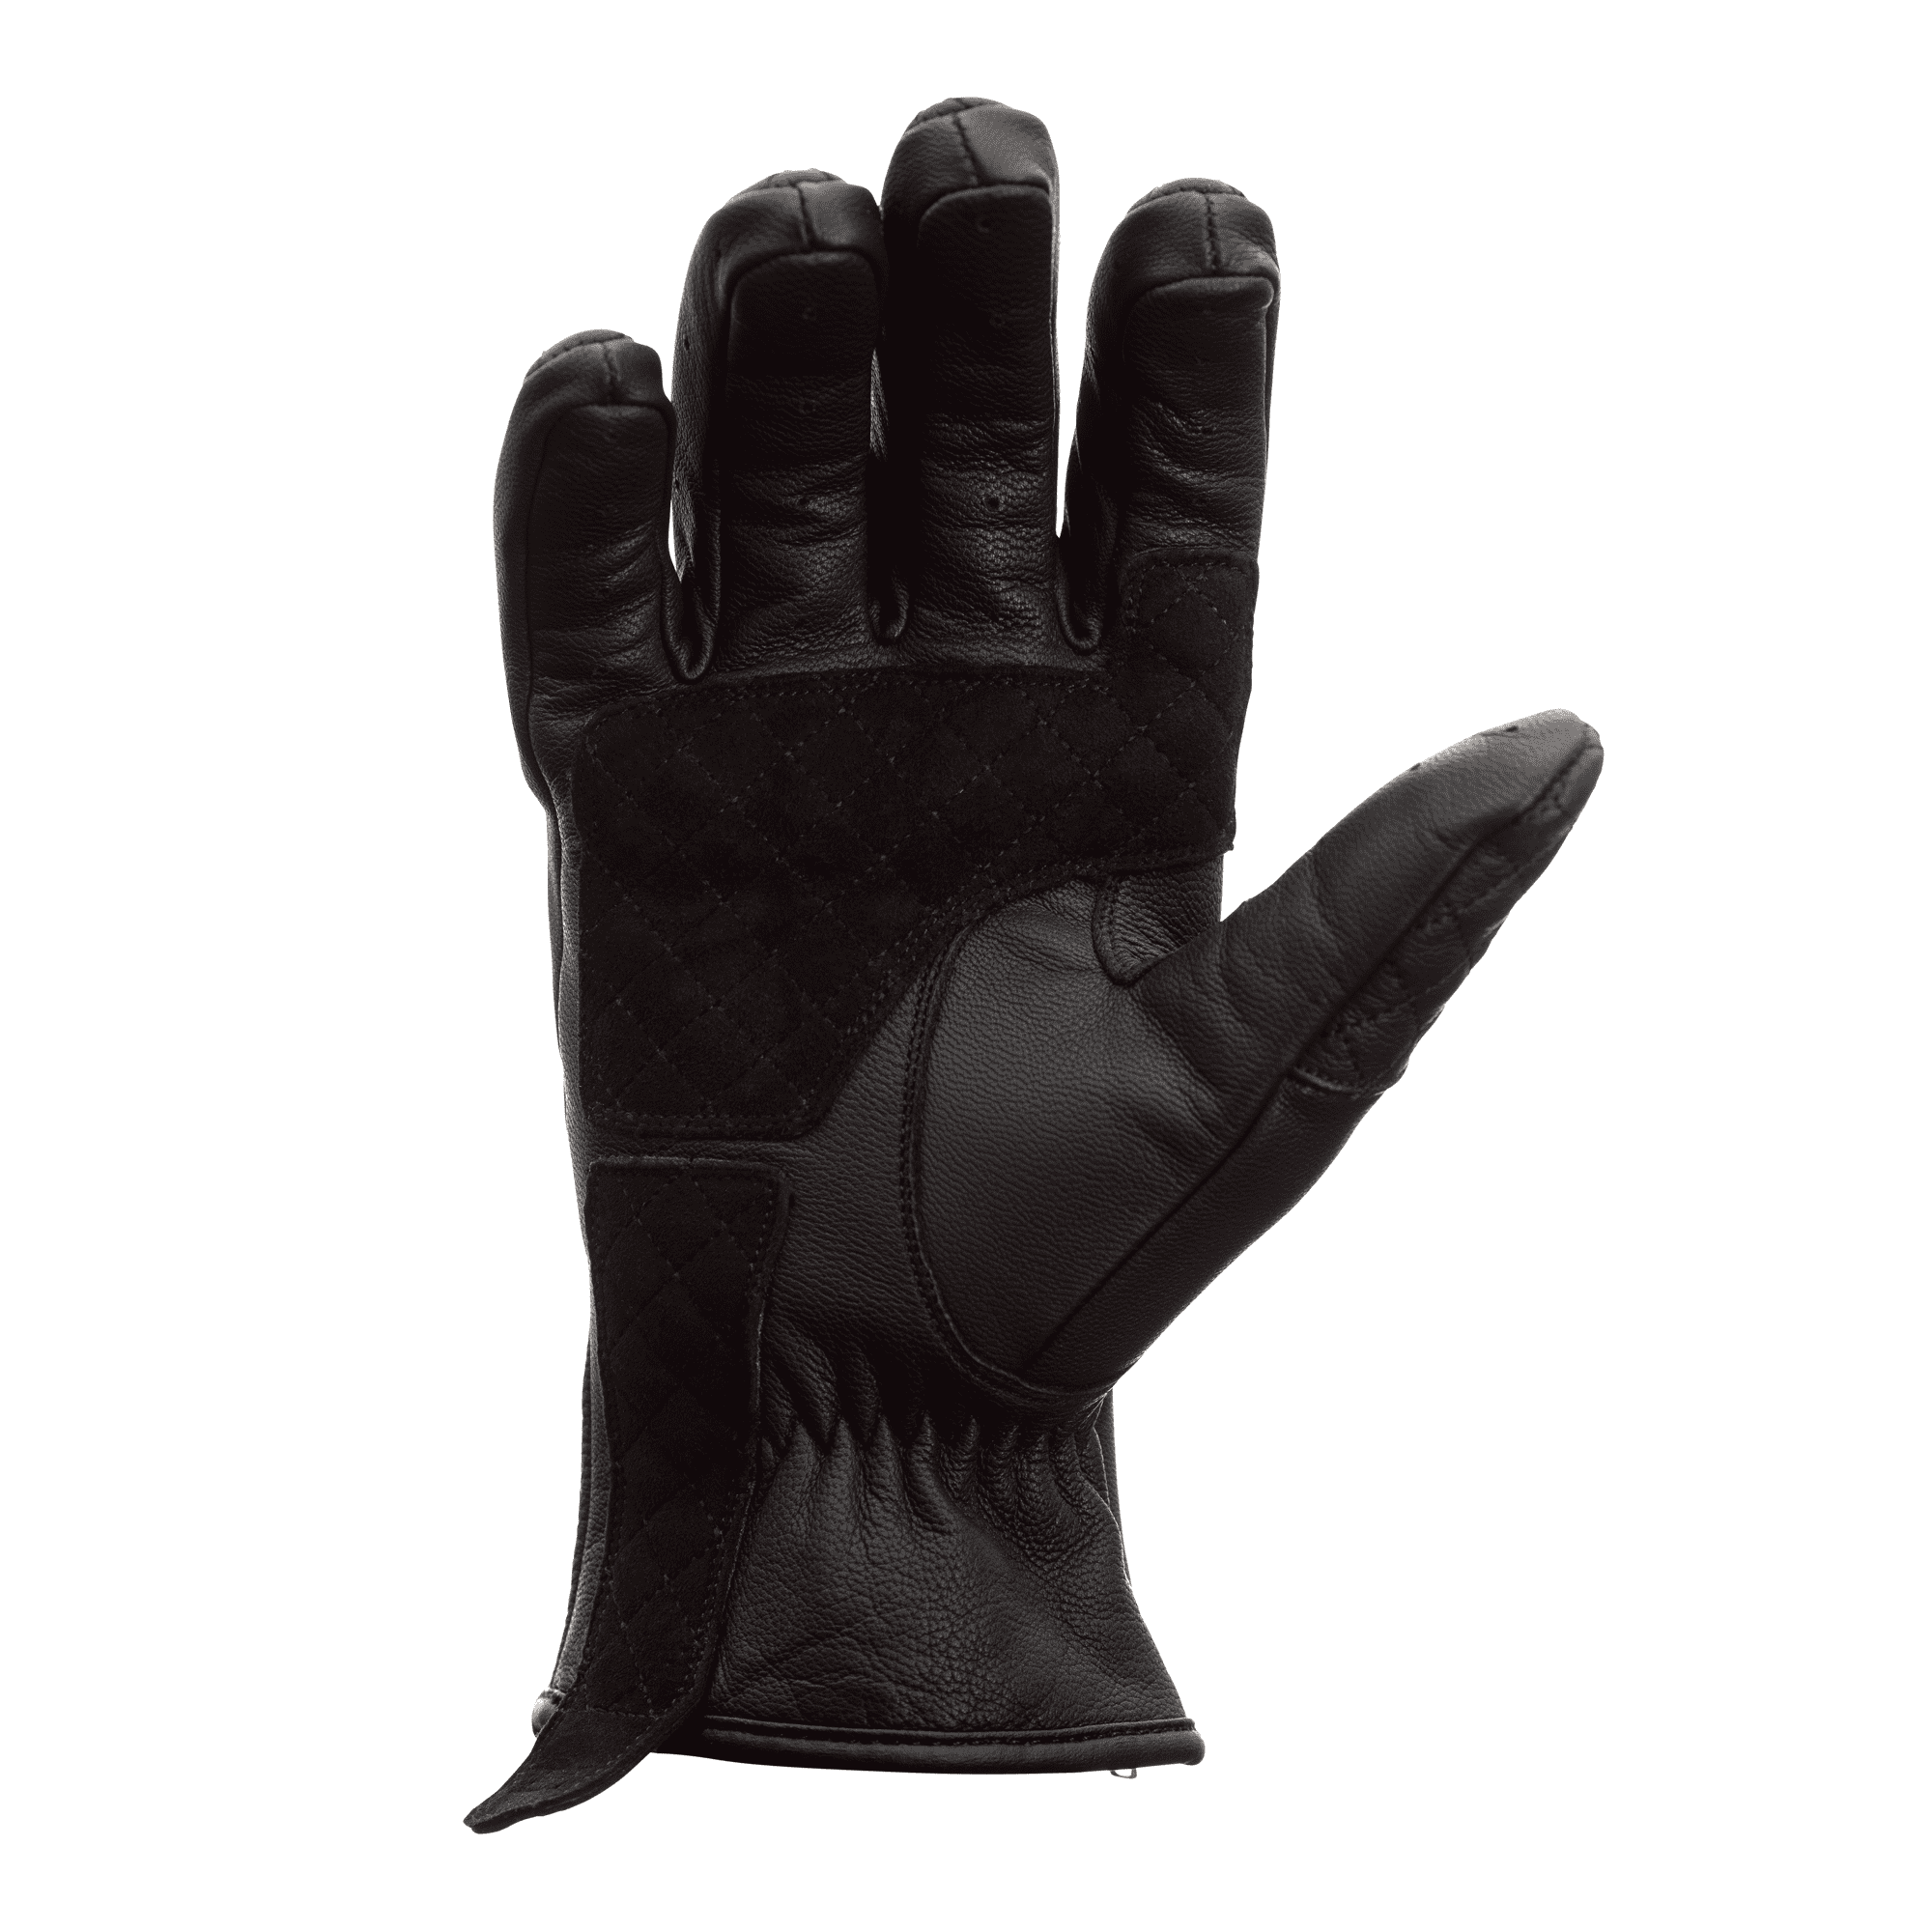 RST RST Matlock CE Black Leather Suede Motorcycle Glove 